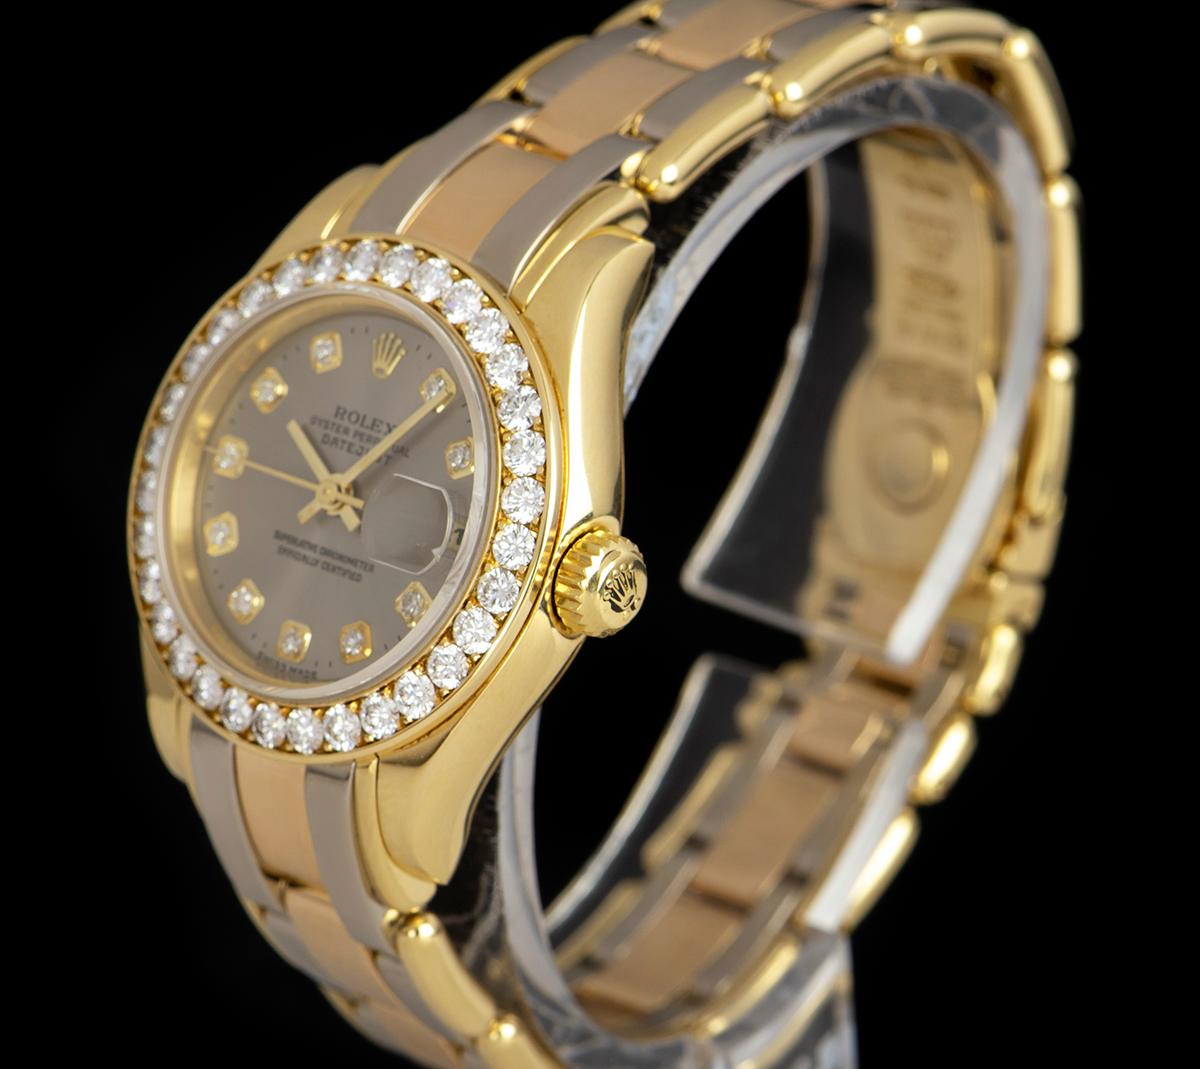 An 18k Yellow Gold Oyster Perpetual Pearlmaster Datejust Ladies Wristwatch, silver dial with 10 applied round brilliant cut diamond hour markers, date at 3 0'clock, a fixed 18k yellow gold bezel set with approximately 32 round brilliant diamonds, an